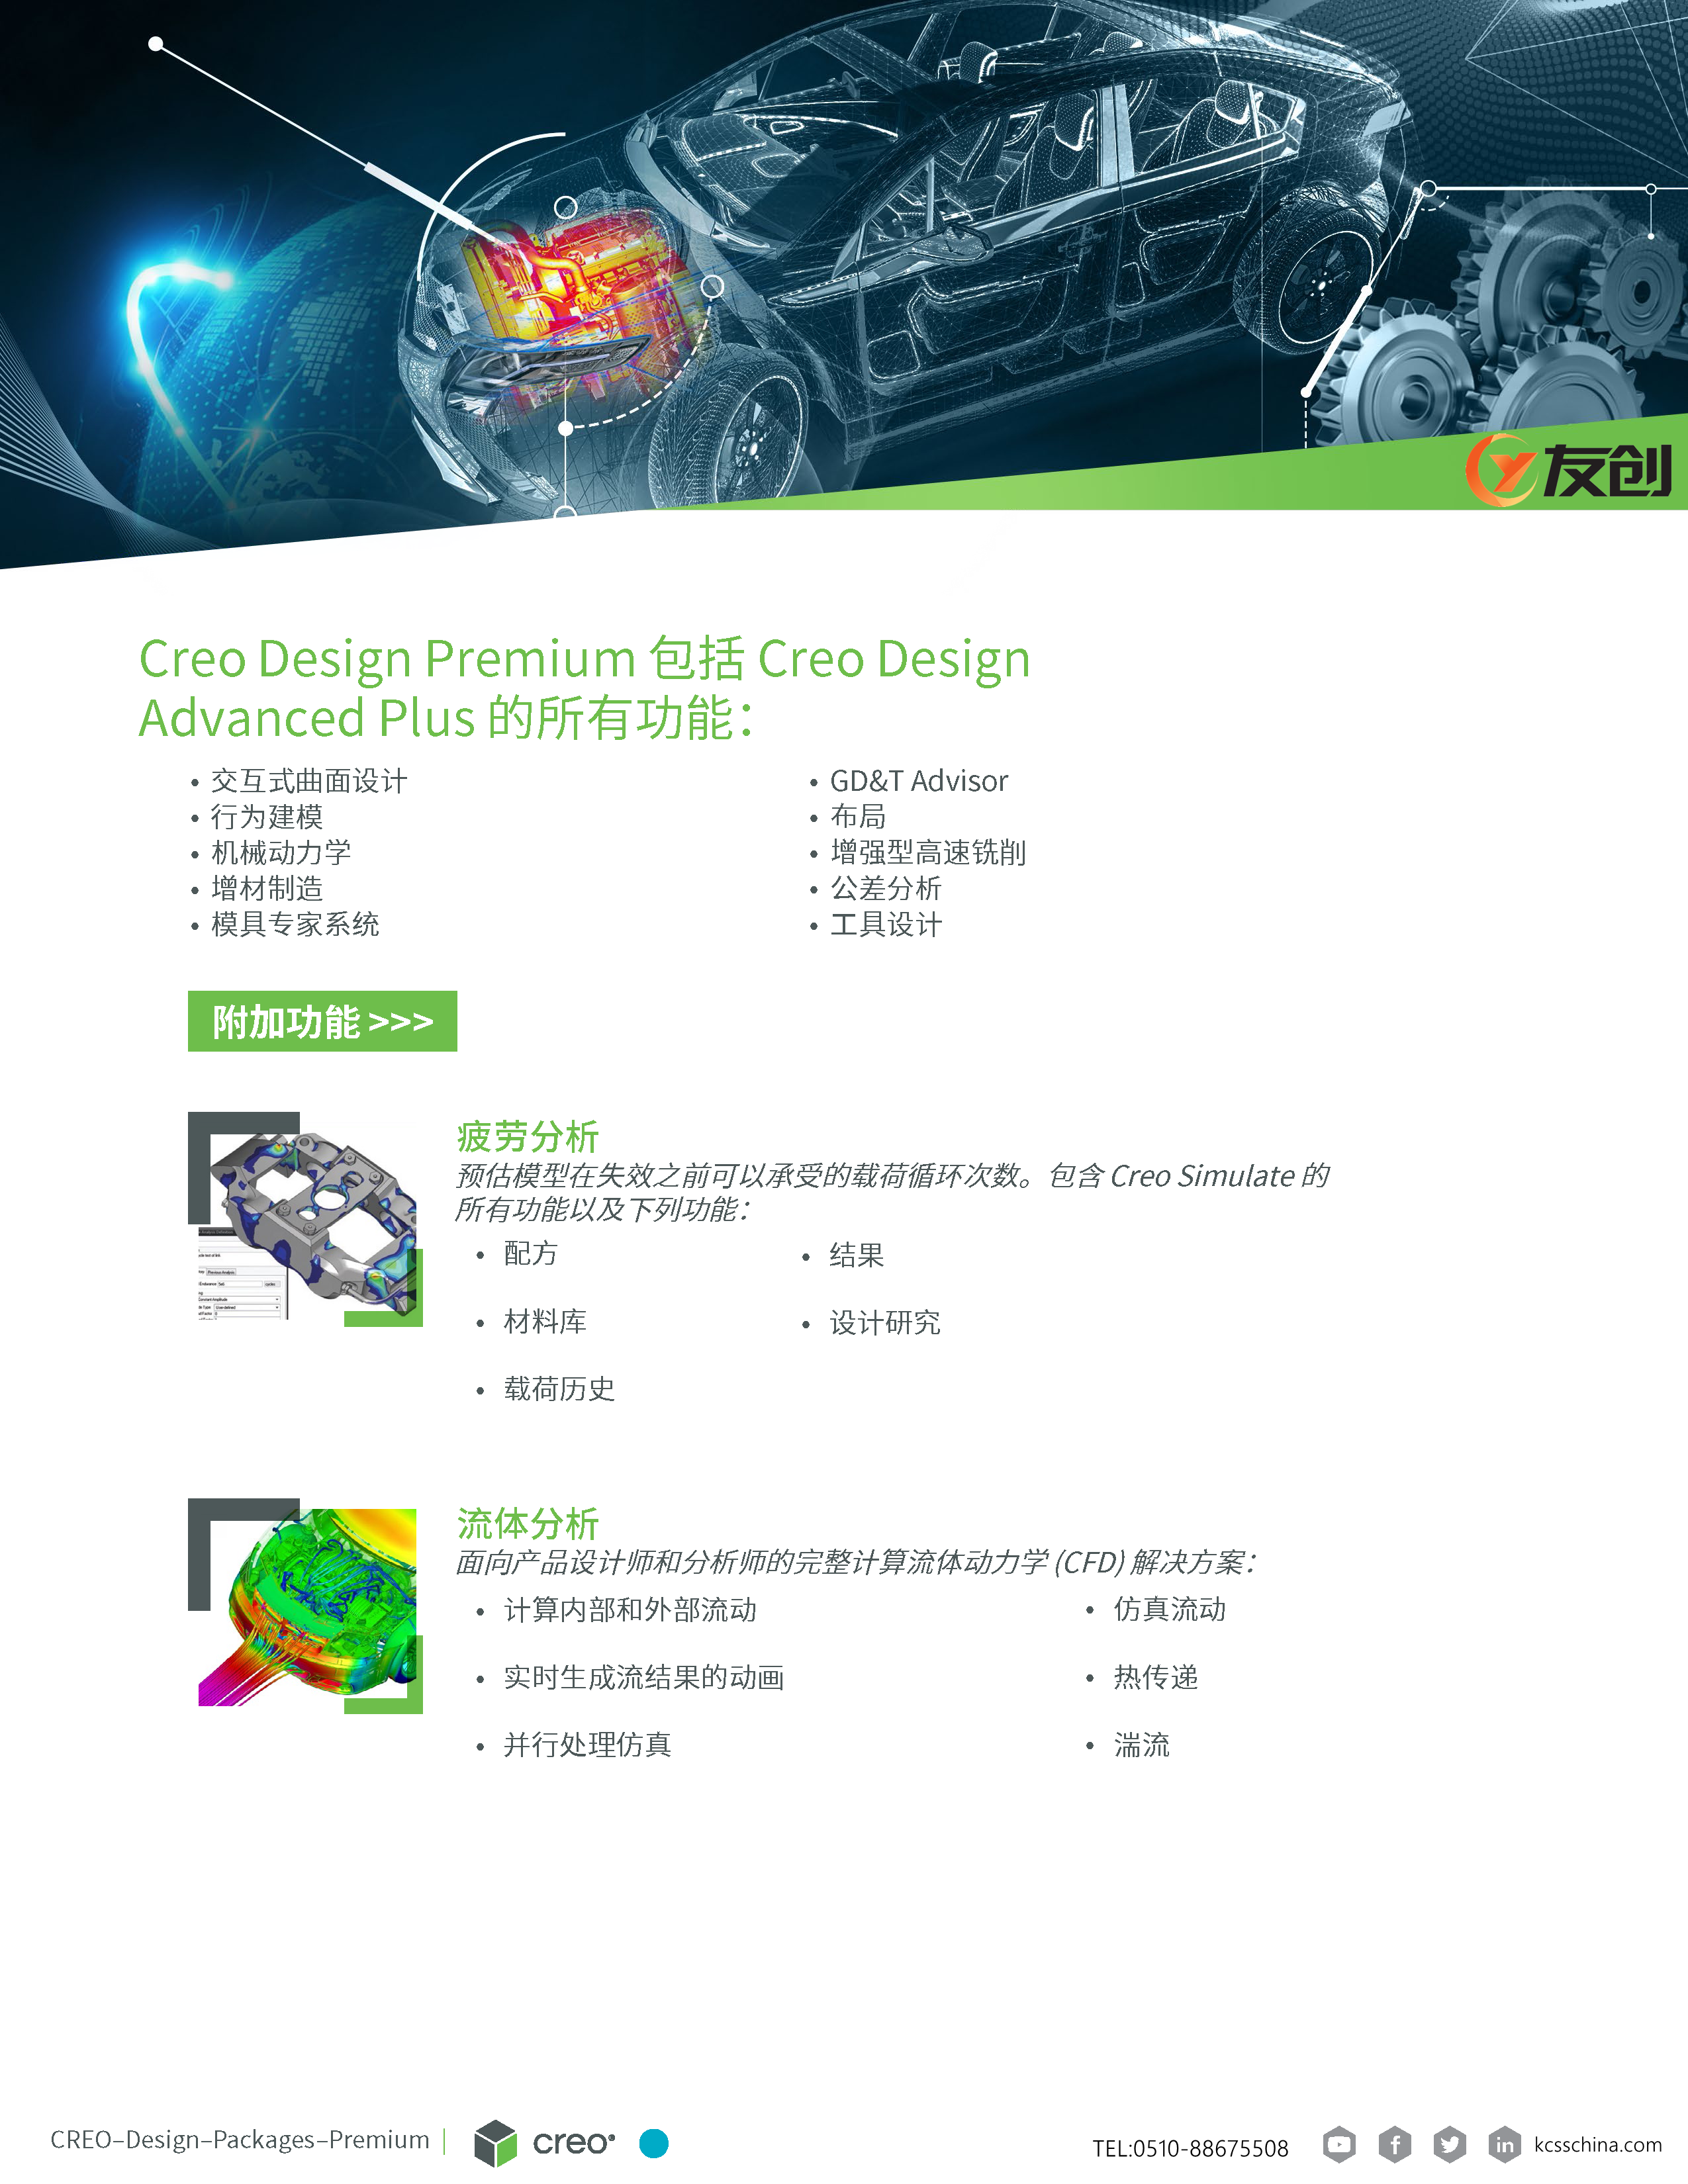 Creo Design Premium Brochure (Simplified Chinese)_页面_3_副本.png